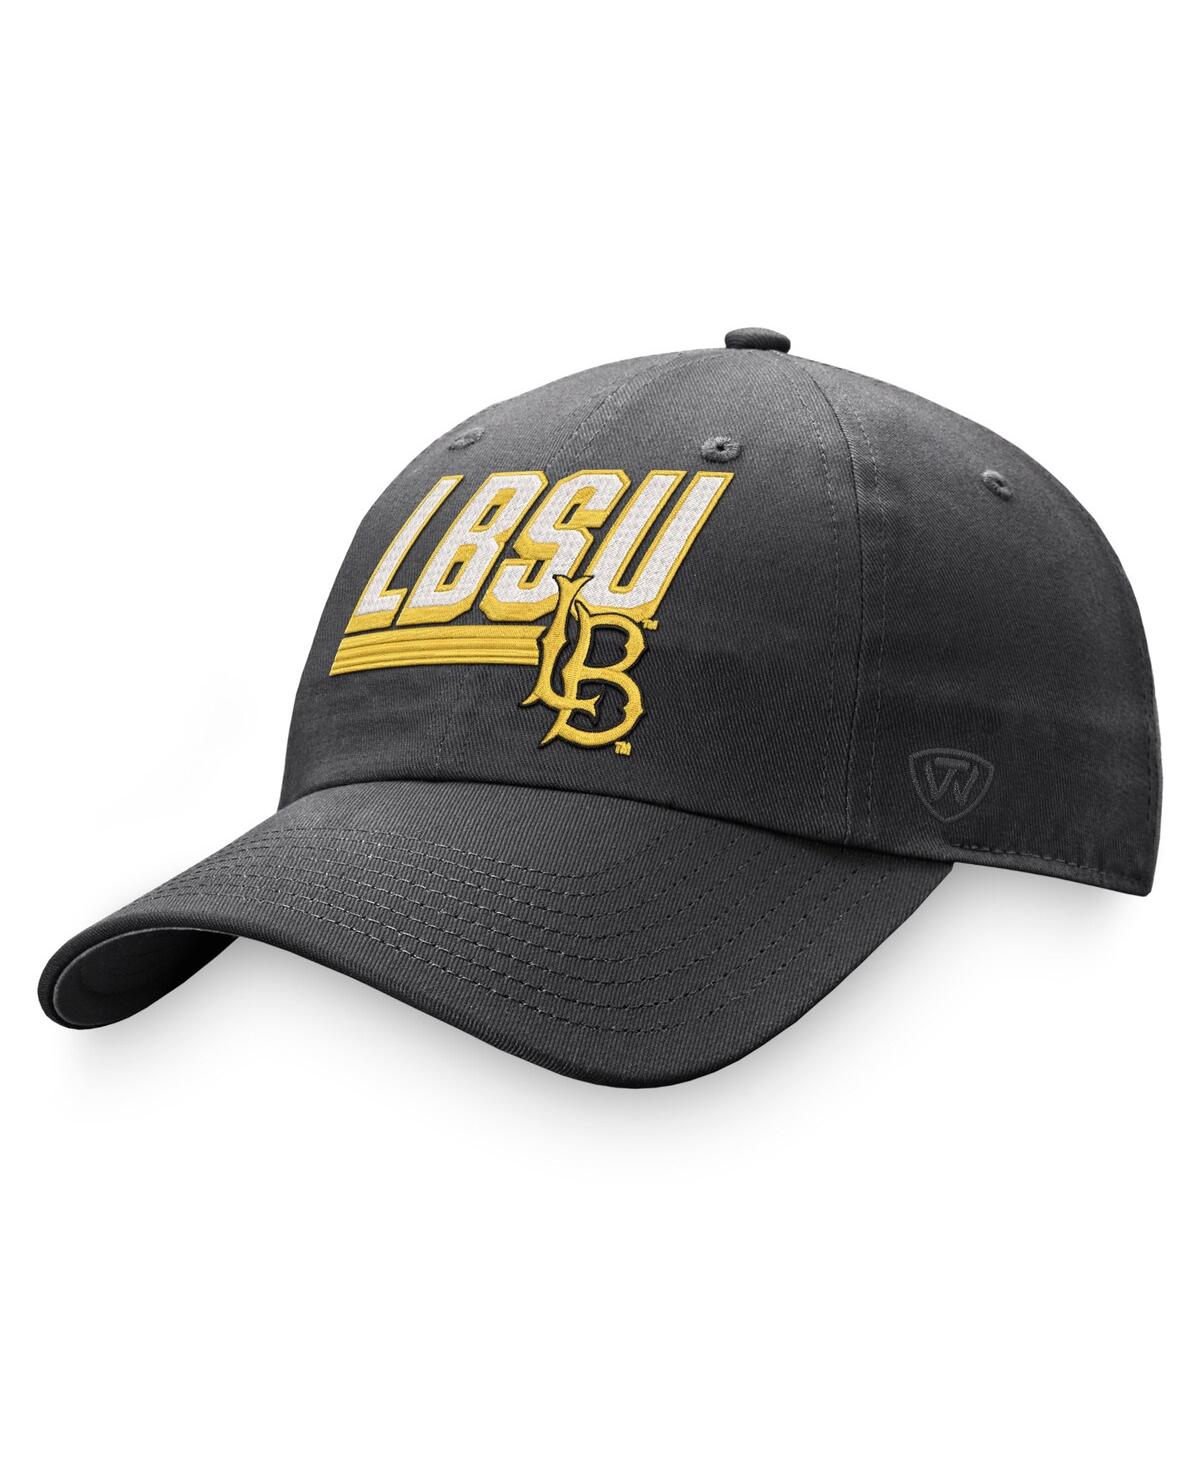 Shop Top Of The World Men's  Charcoal Long Beach State 49ers Slice Adjustable Hat